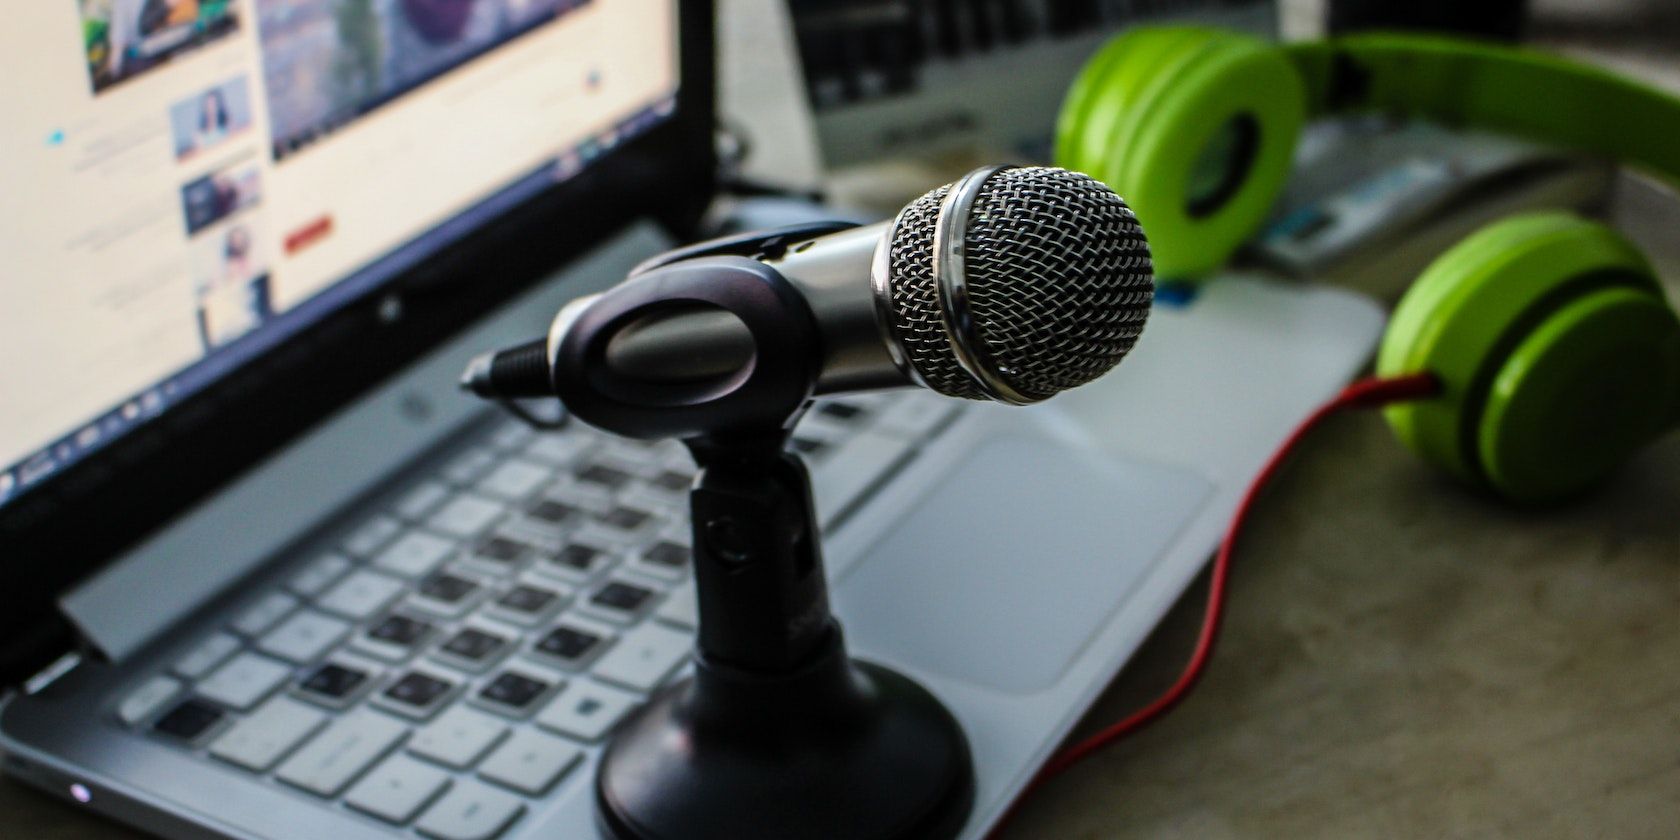 A black microphone on a laptop with green headphones in the background